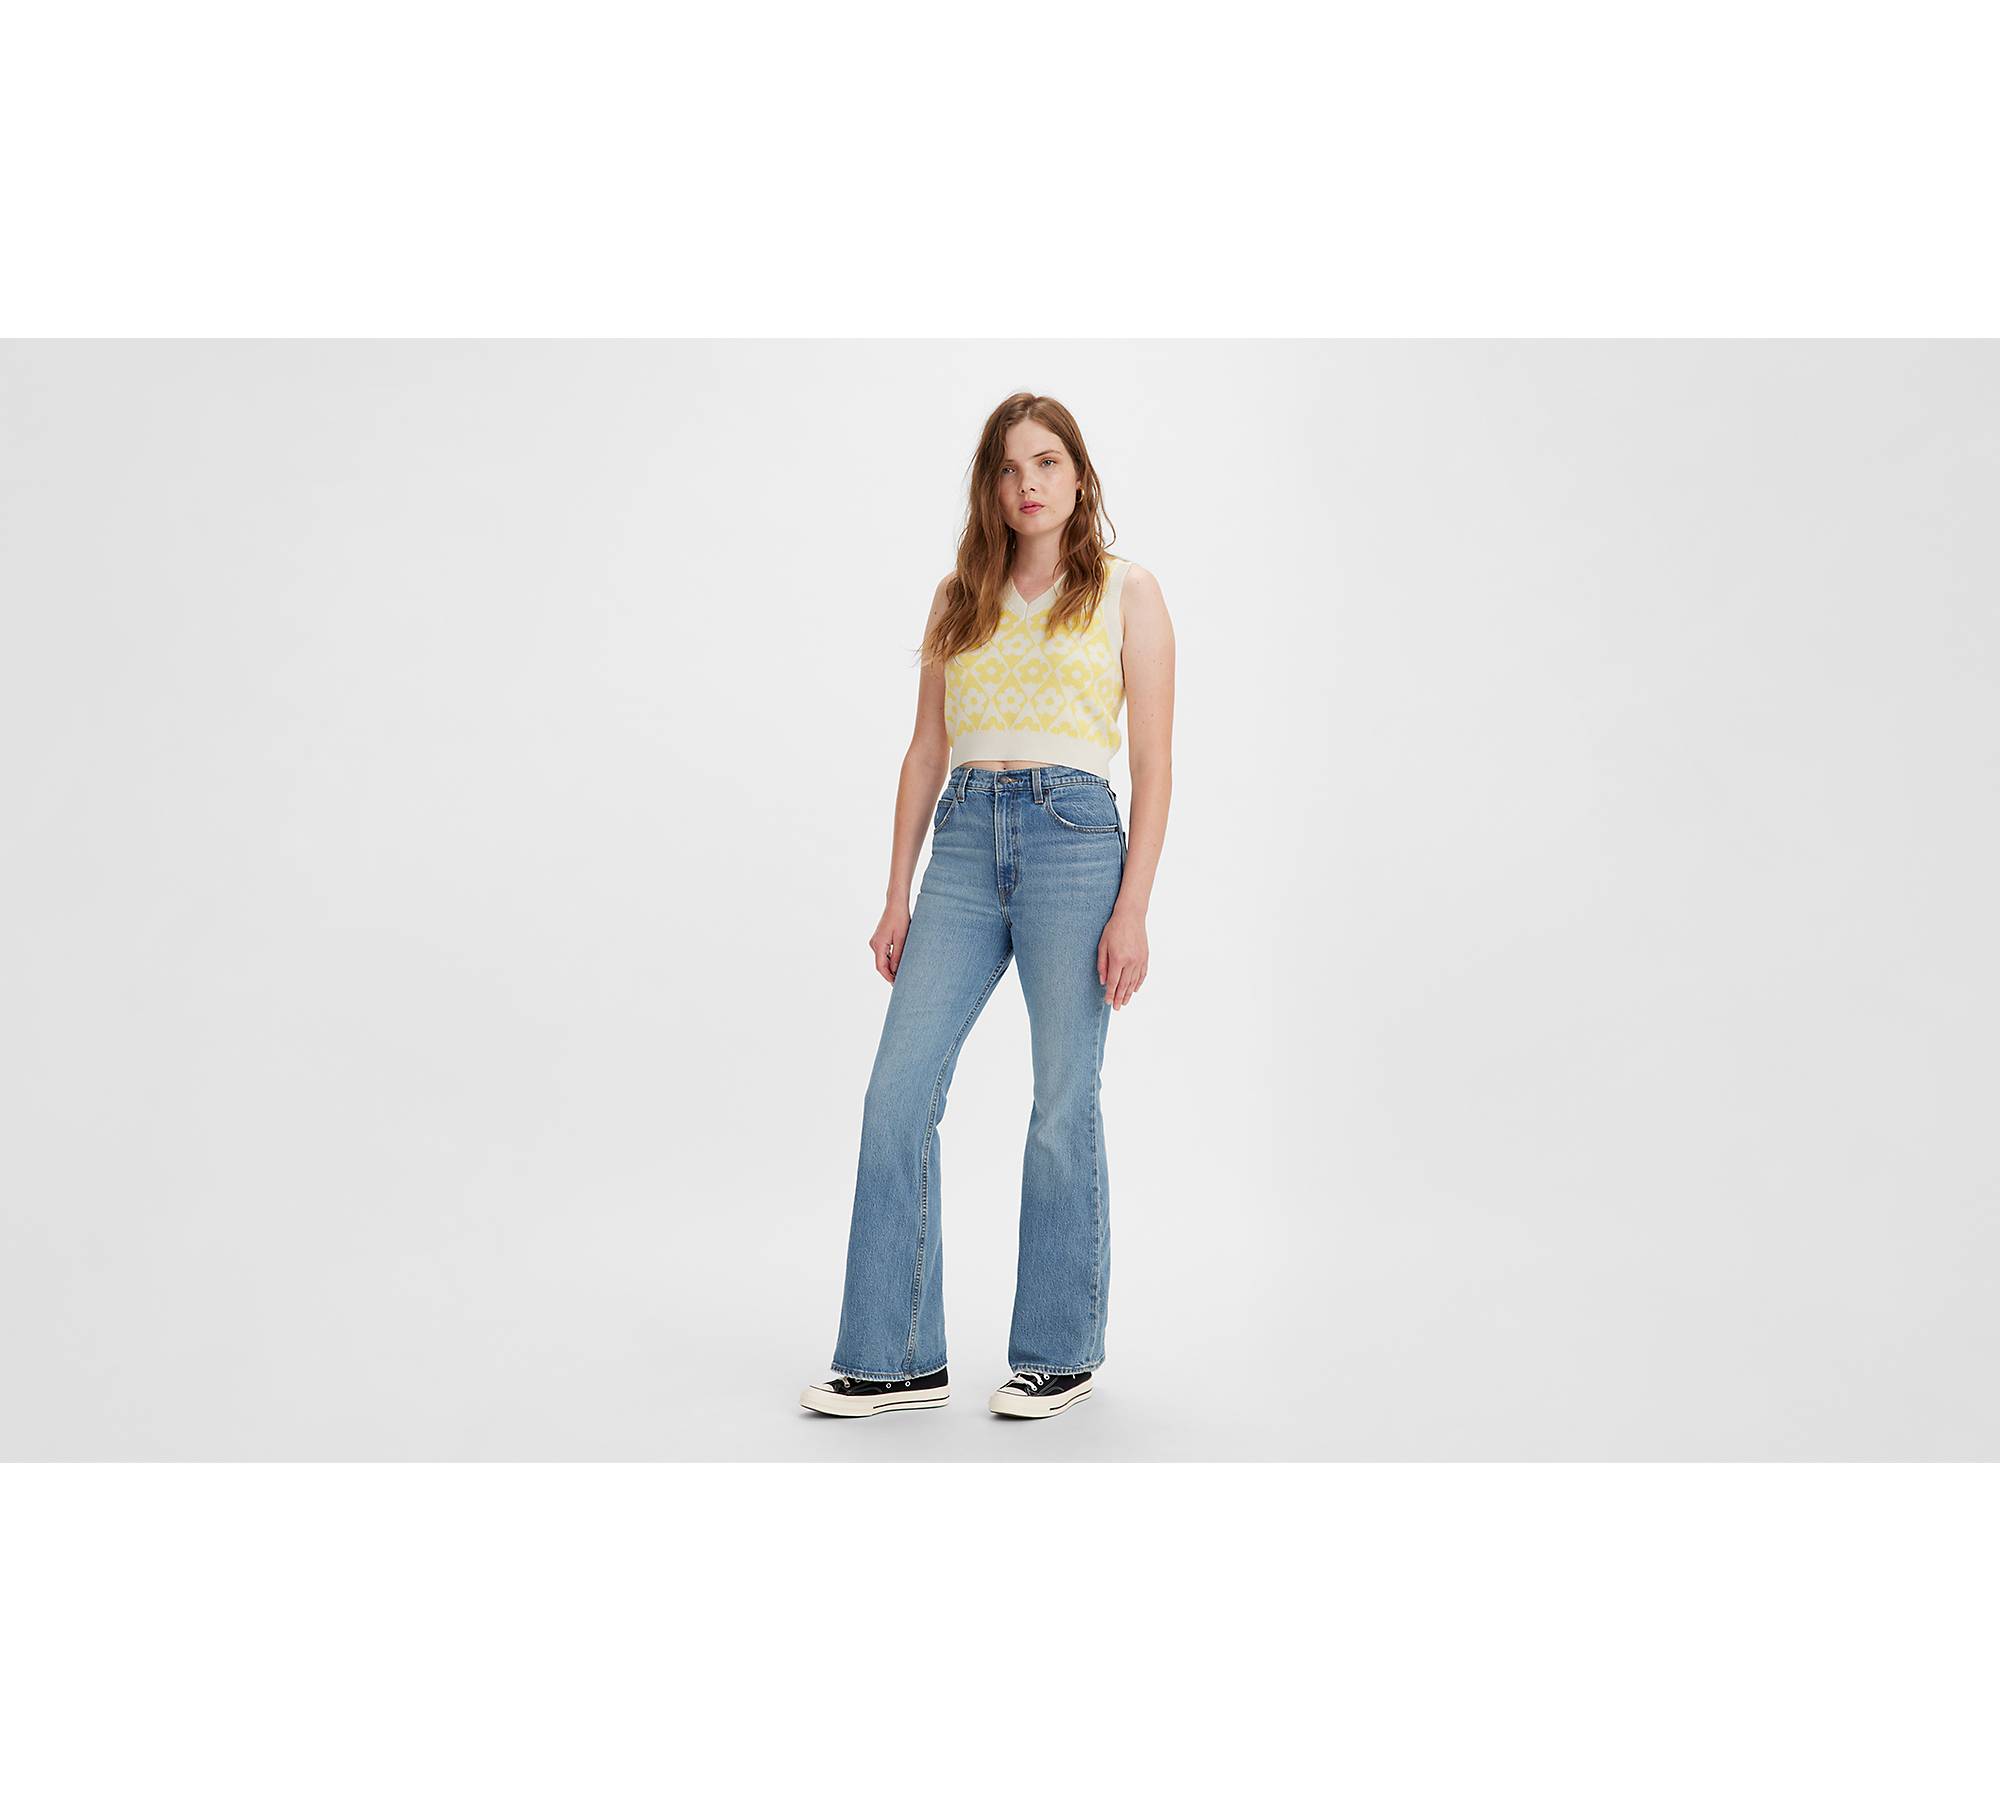 Flare Jeans For Tall Women - Shop on Pinterest